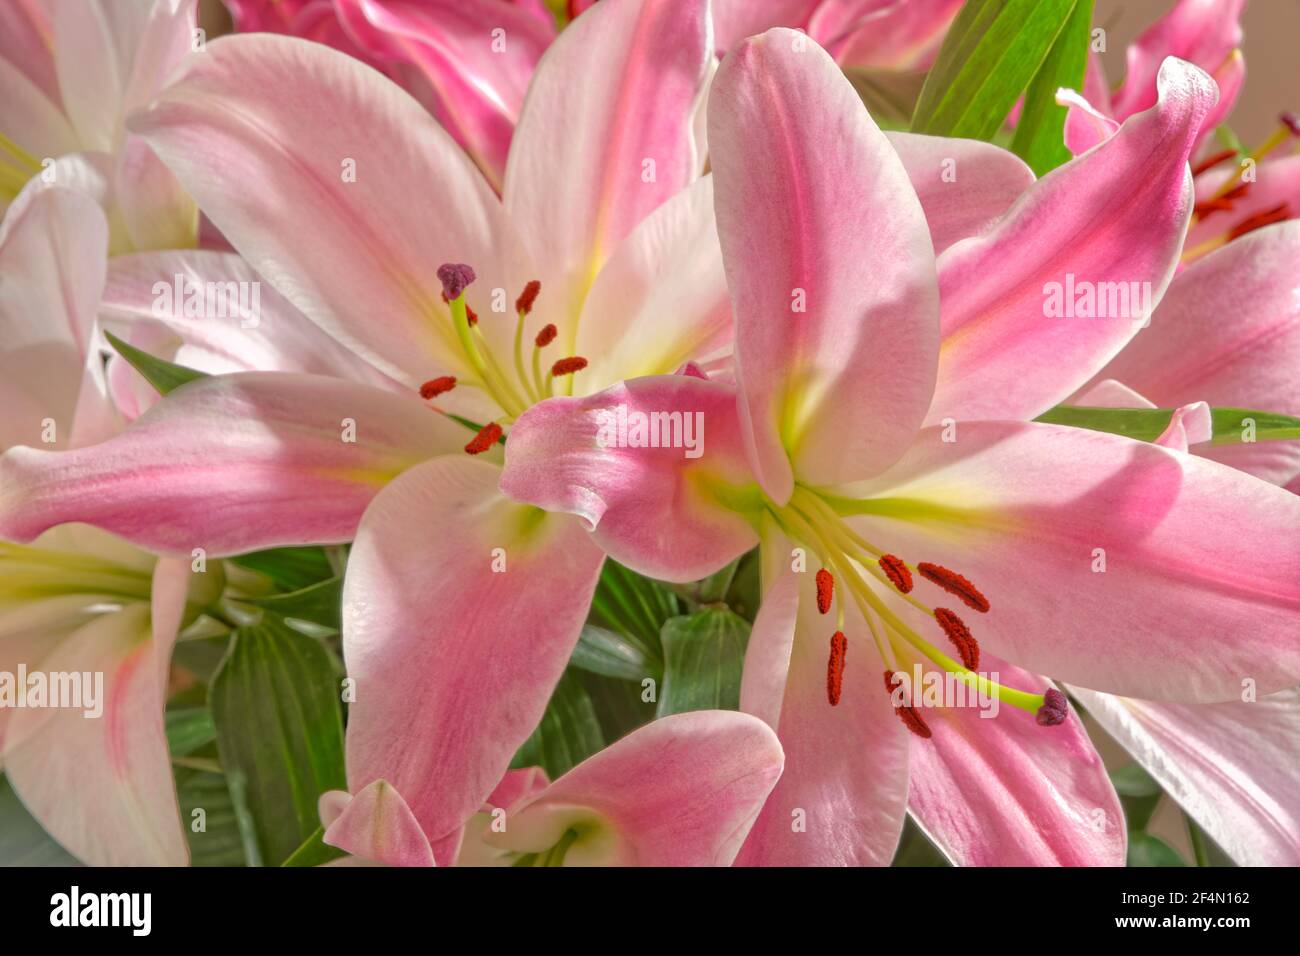 Pink Lily flowers. Stock Photo